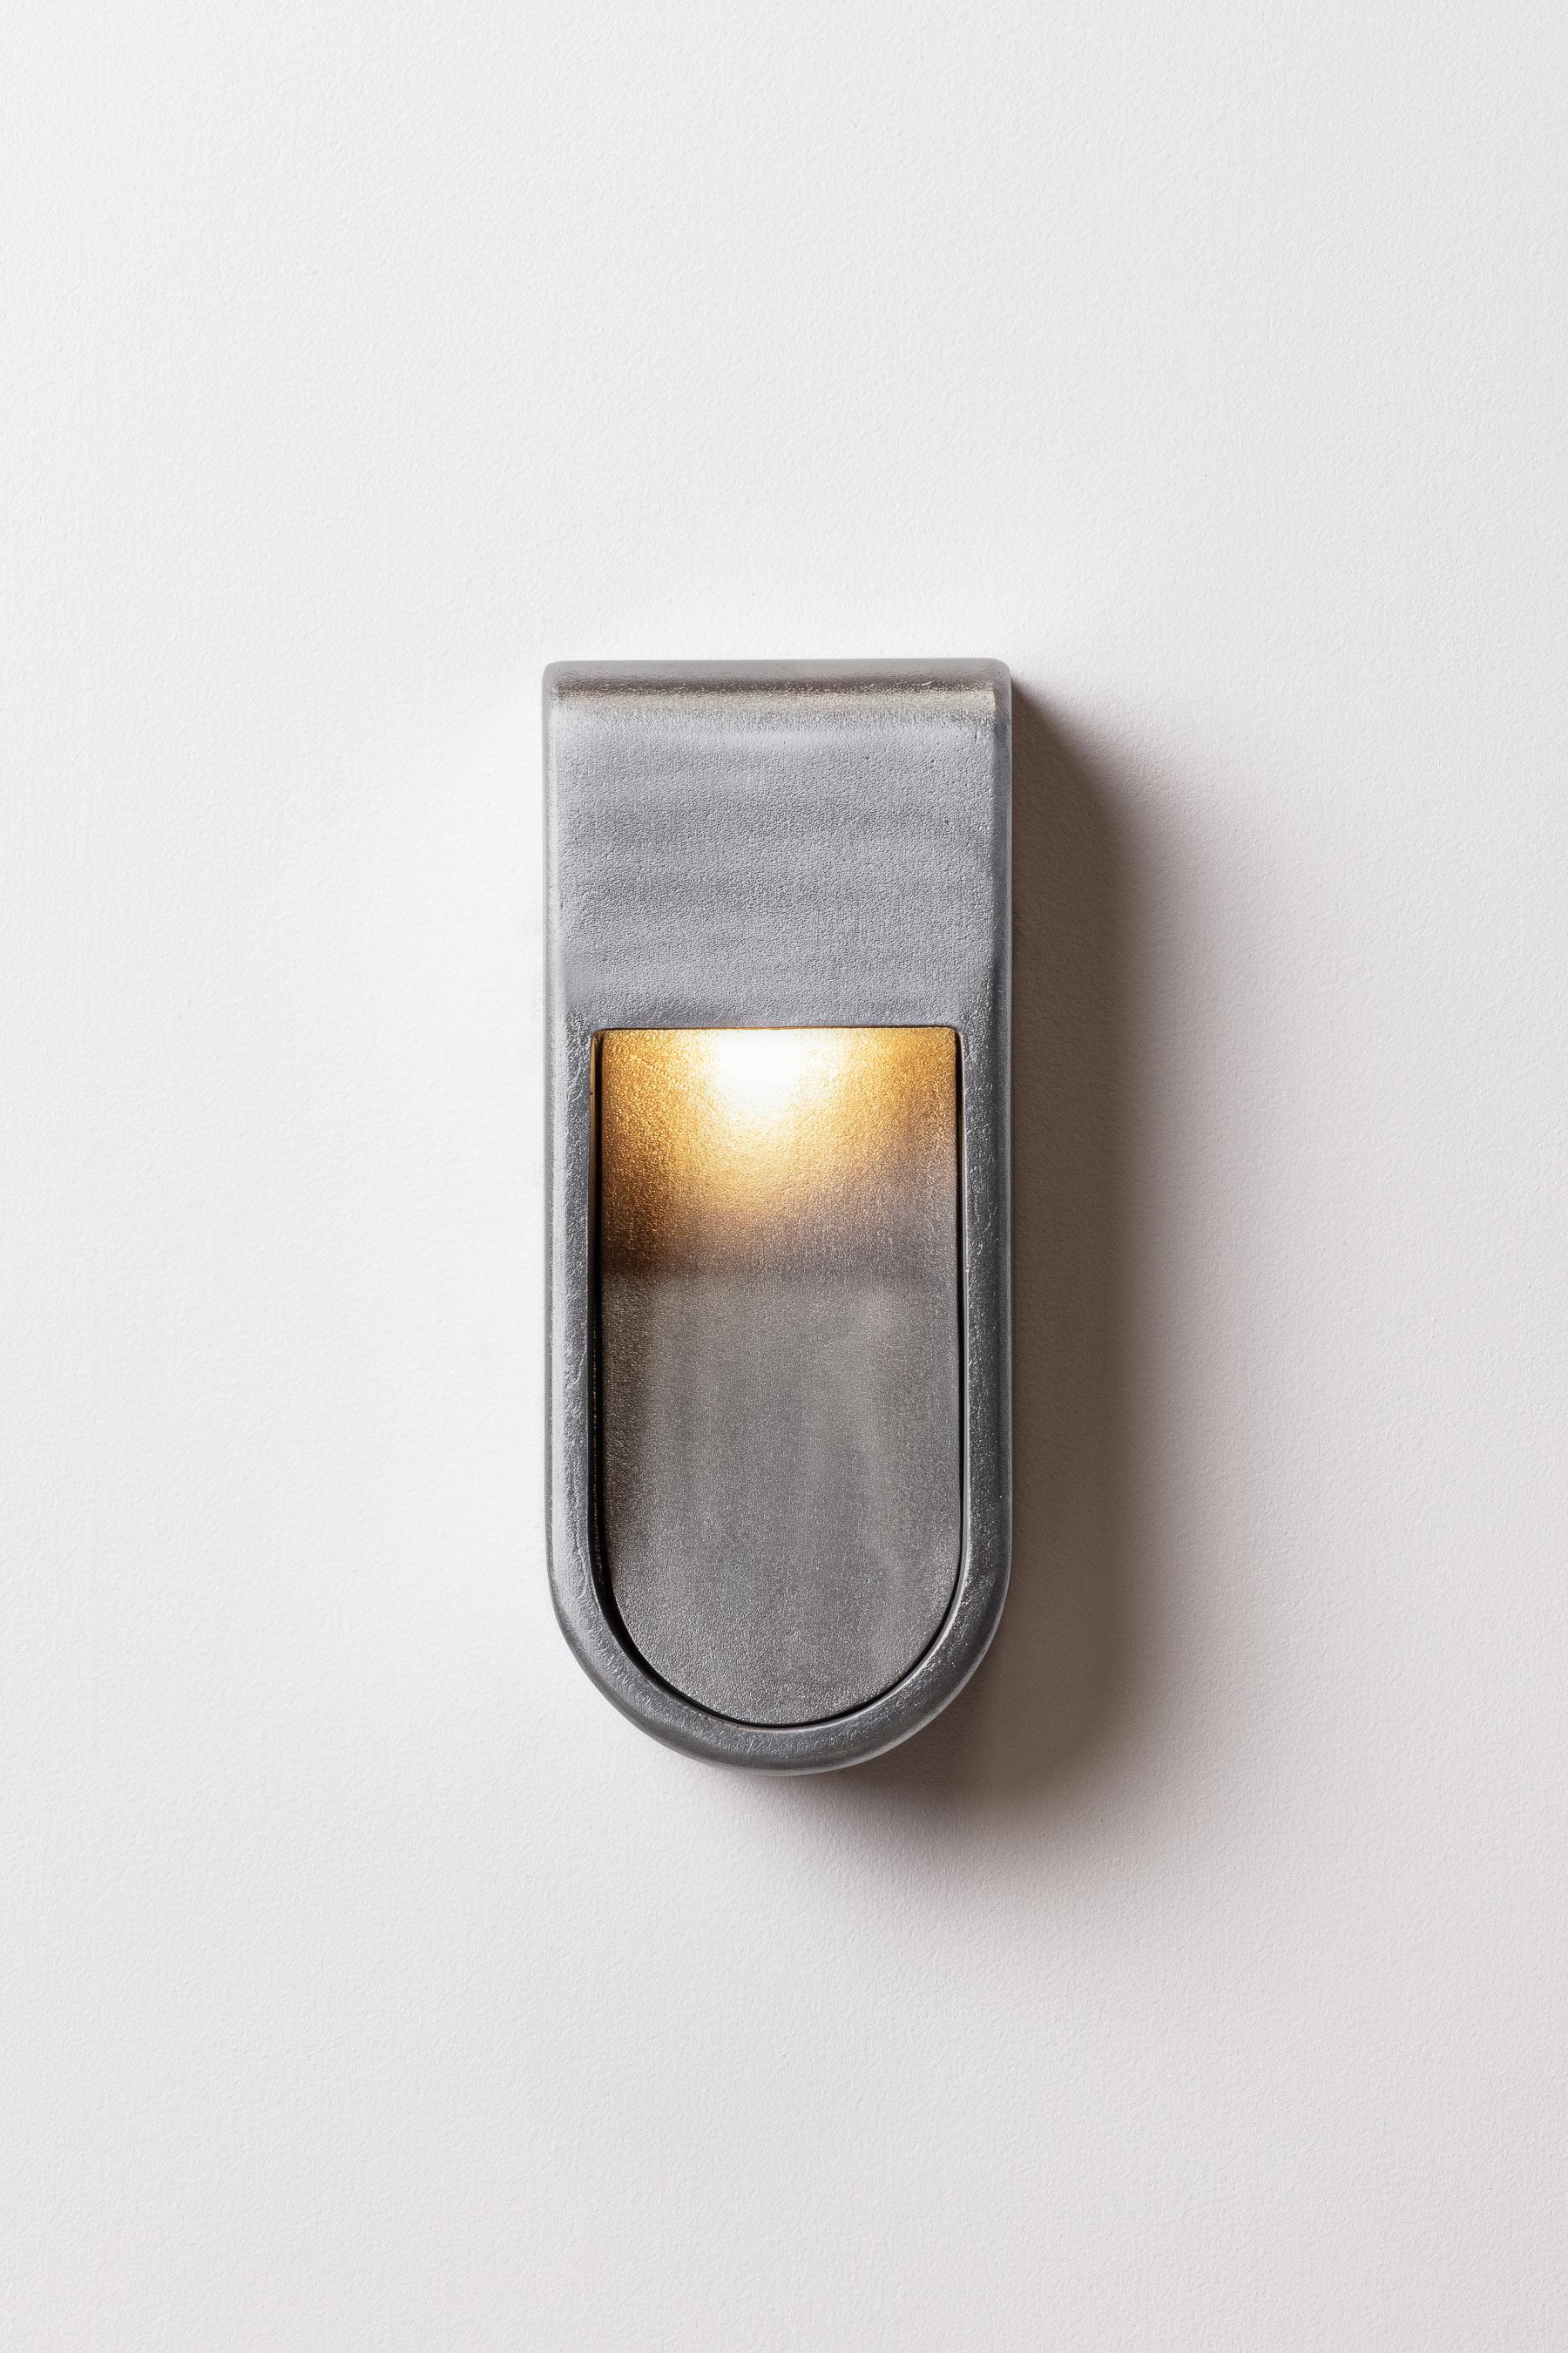 Kyoto is a unique outdoor/indoor lamp collection. Sand cast in aluminum with a raw aluminum finish but available blackened, brass, bronze and silver. The sconces are handmade sculptures that are resistant to the elements.

Each piece is